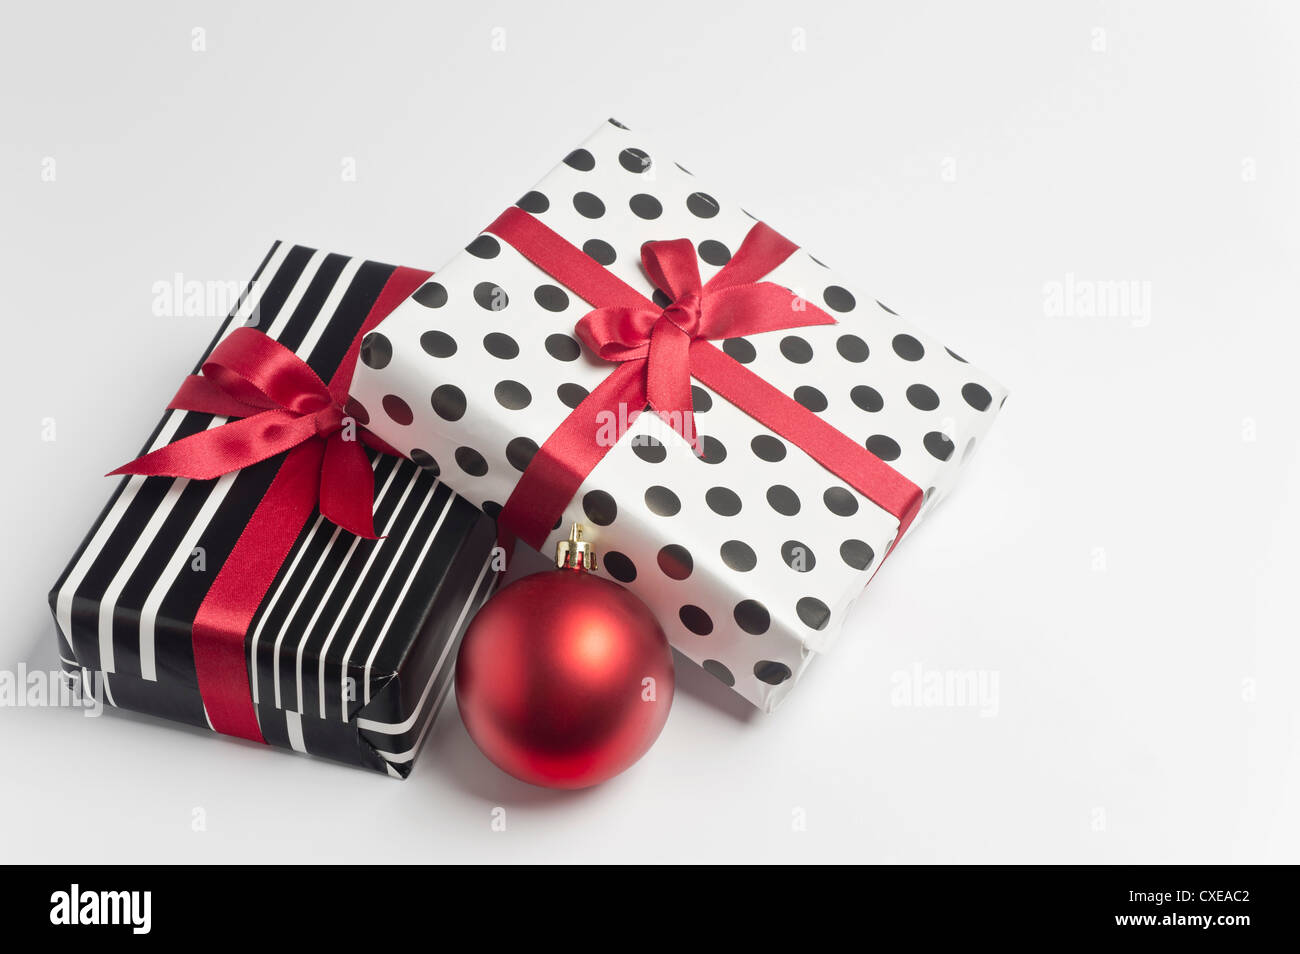 Festively wrapped Christmas gifts Stock Photo